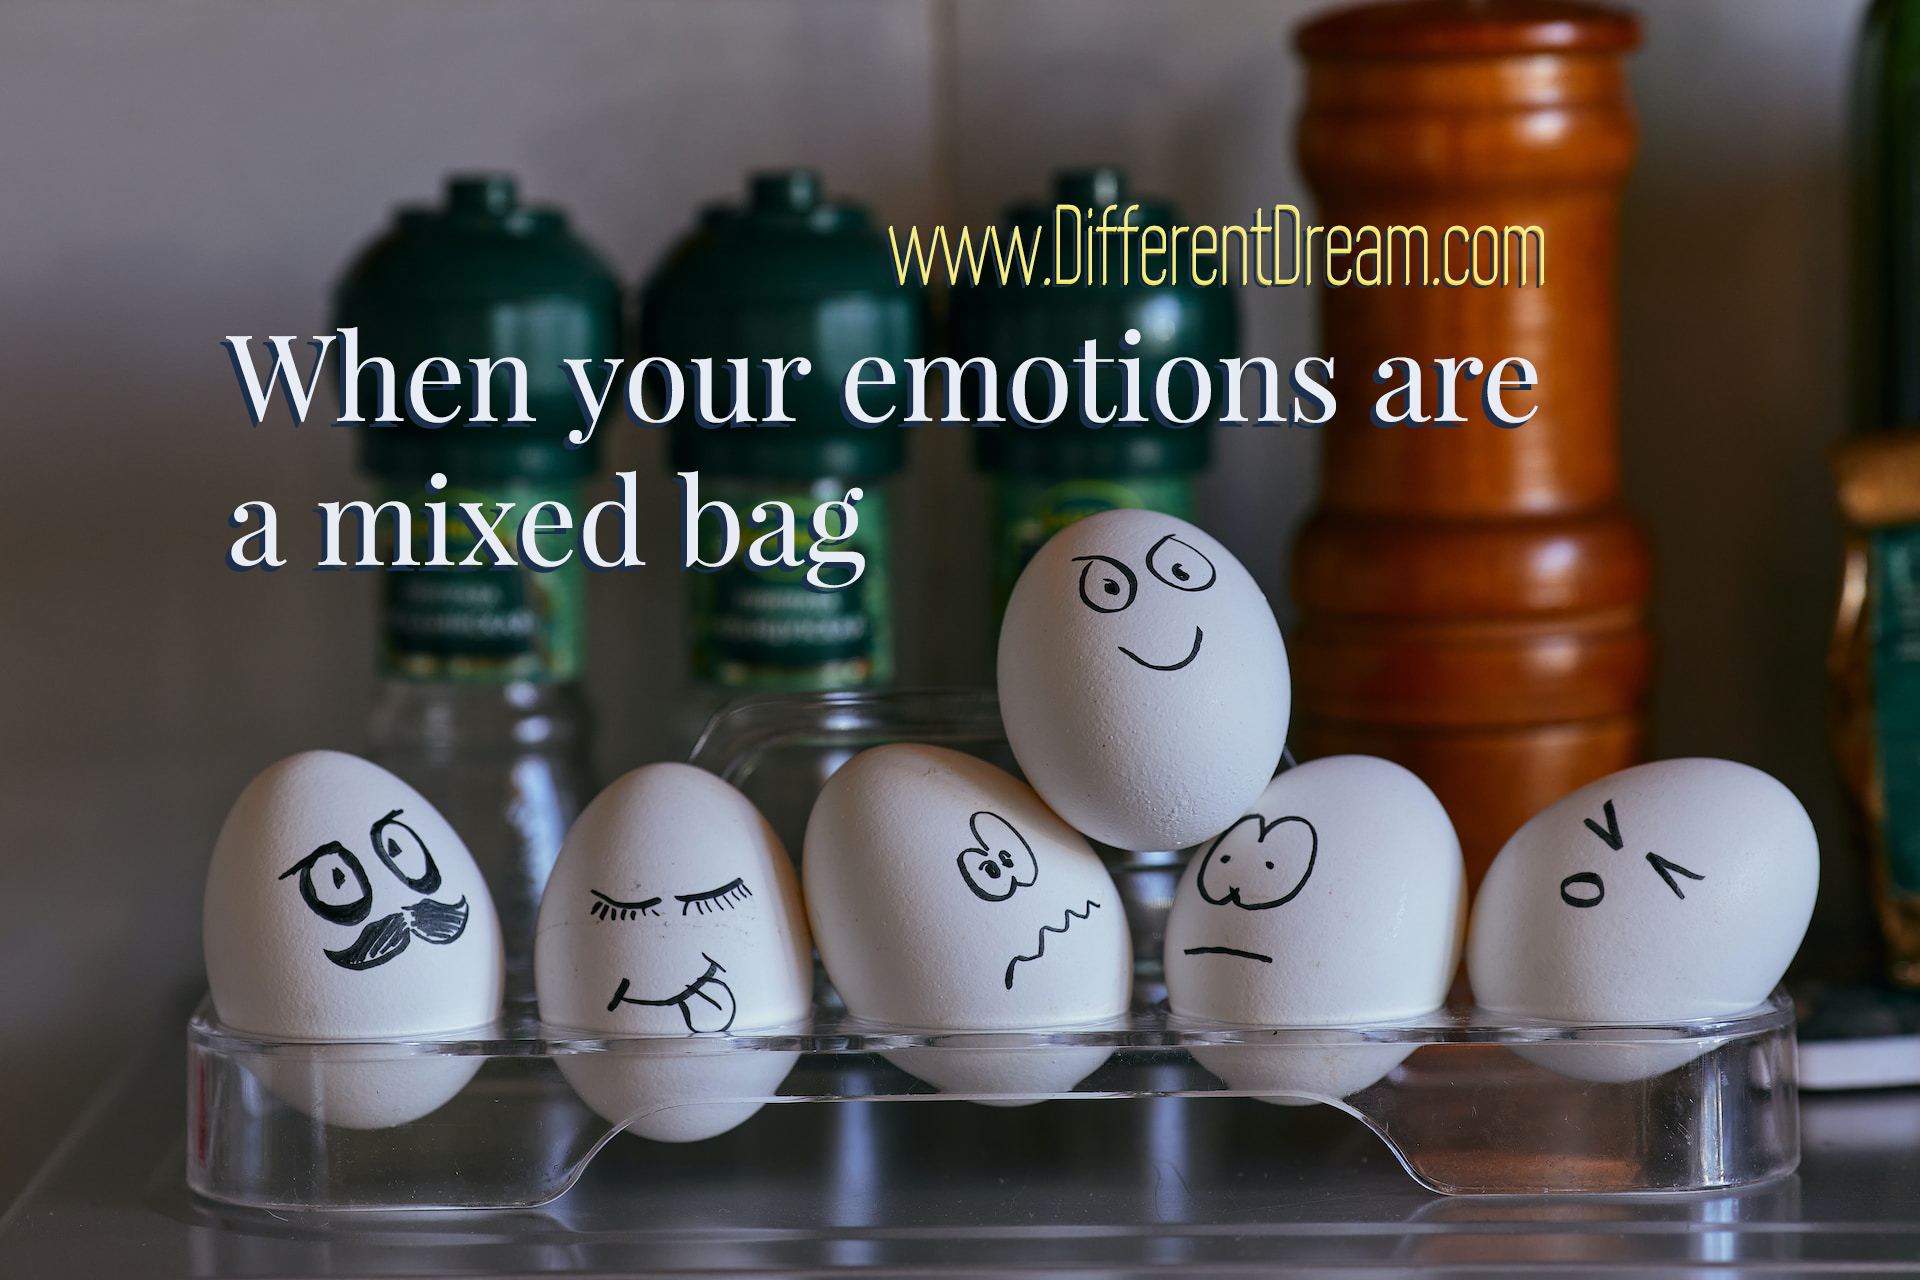 Guest blogger Kristin Faith Evans offers tips for managing mixed emotions when our kids with disabilities go back to school.